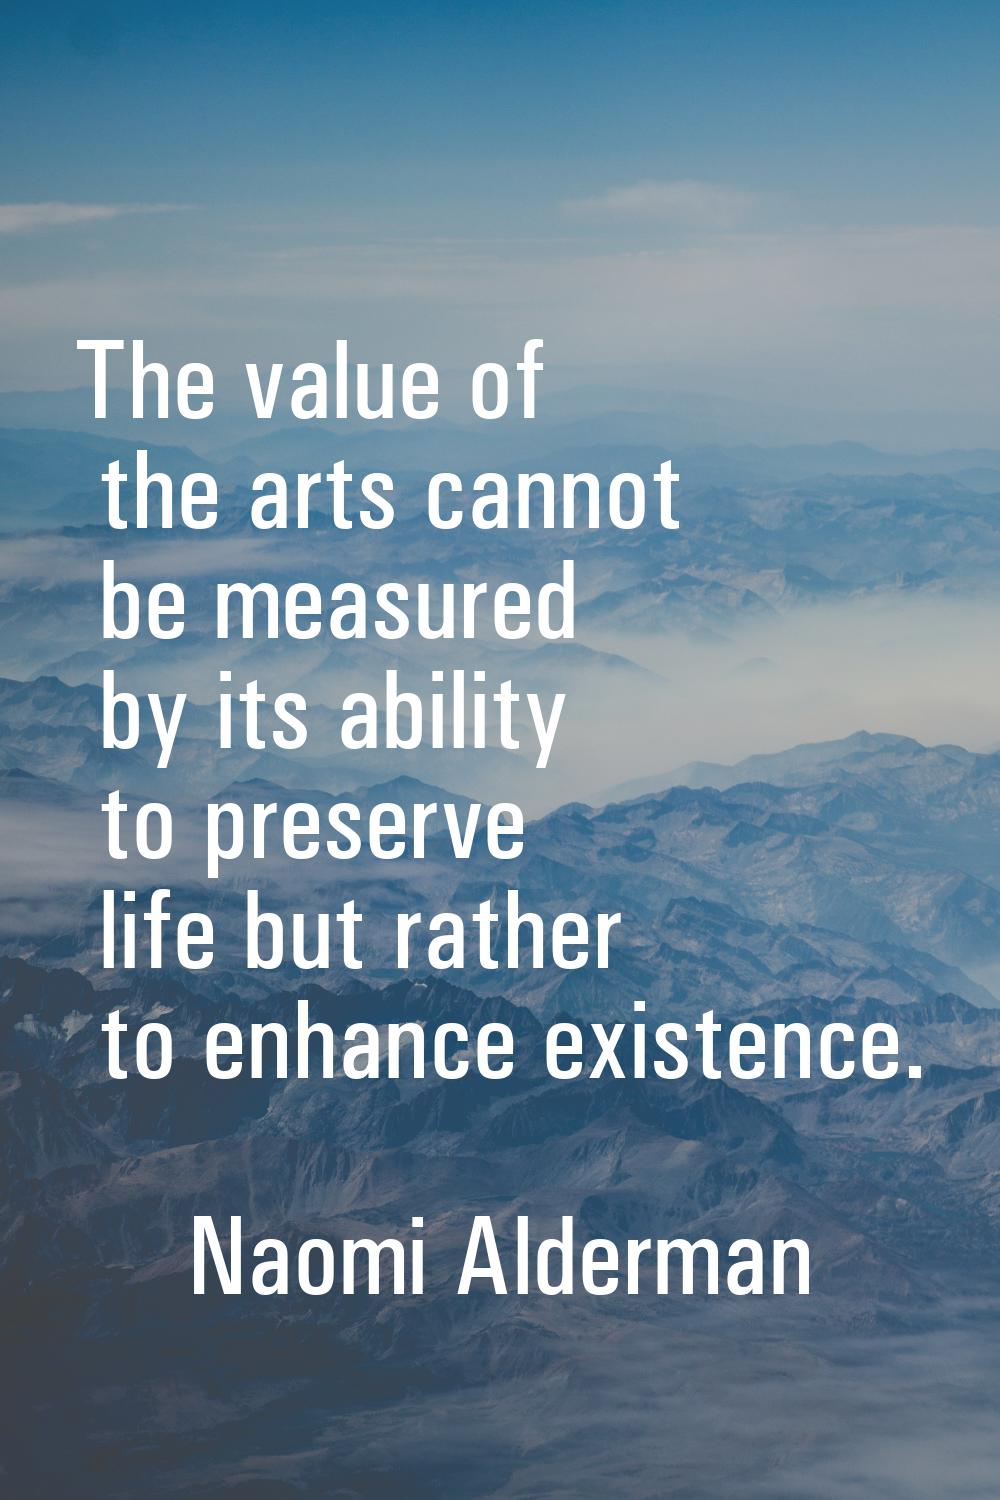 The value of the arts cannot be measured by its ability to preserve life but rather to enhance exis